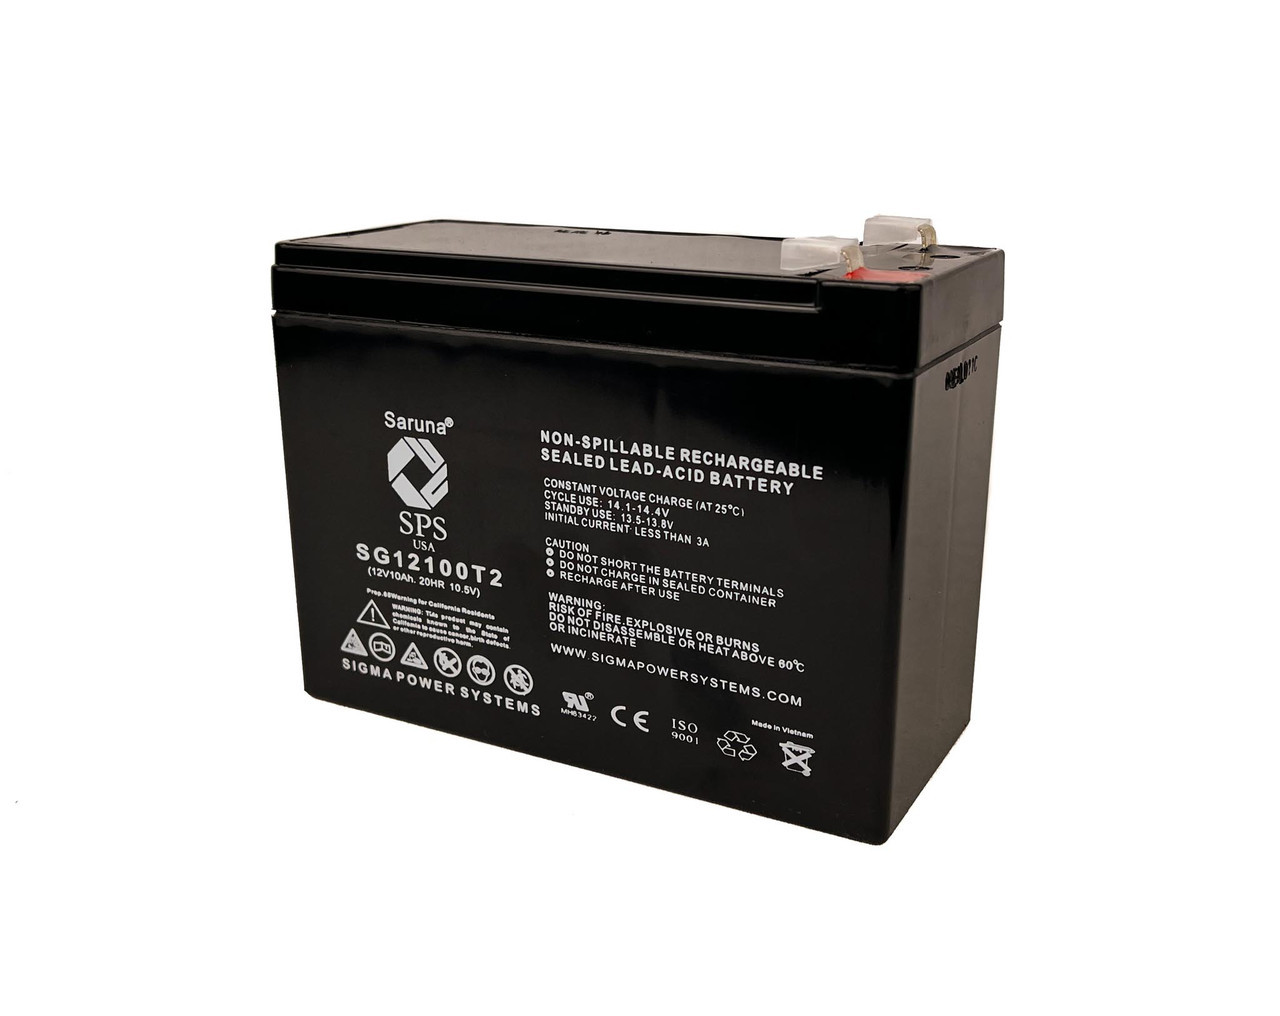 Raion Power 12V 10Ah Non-Spillable Replacement Rechargebale Battery for ExpertPower EXP12100